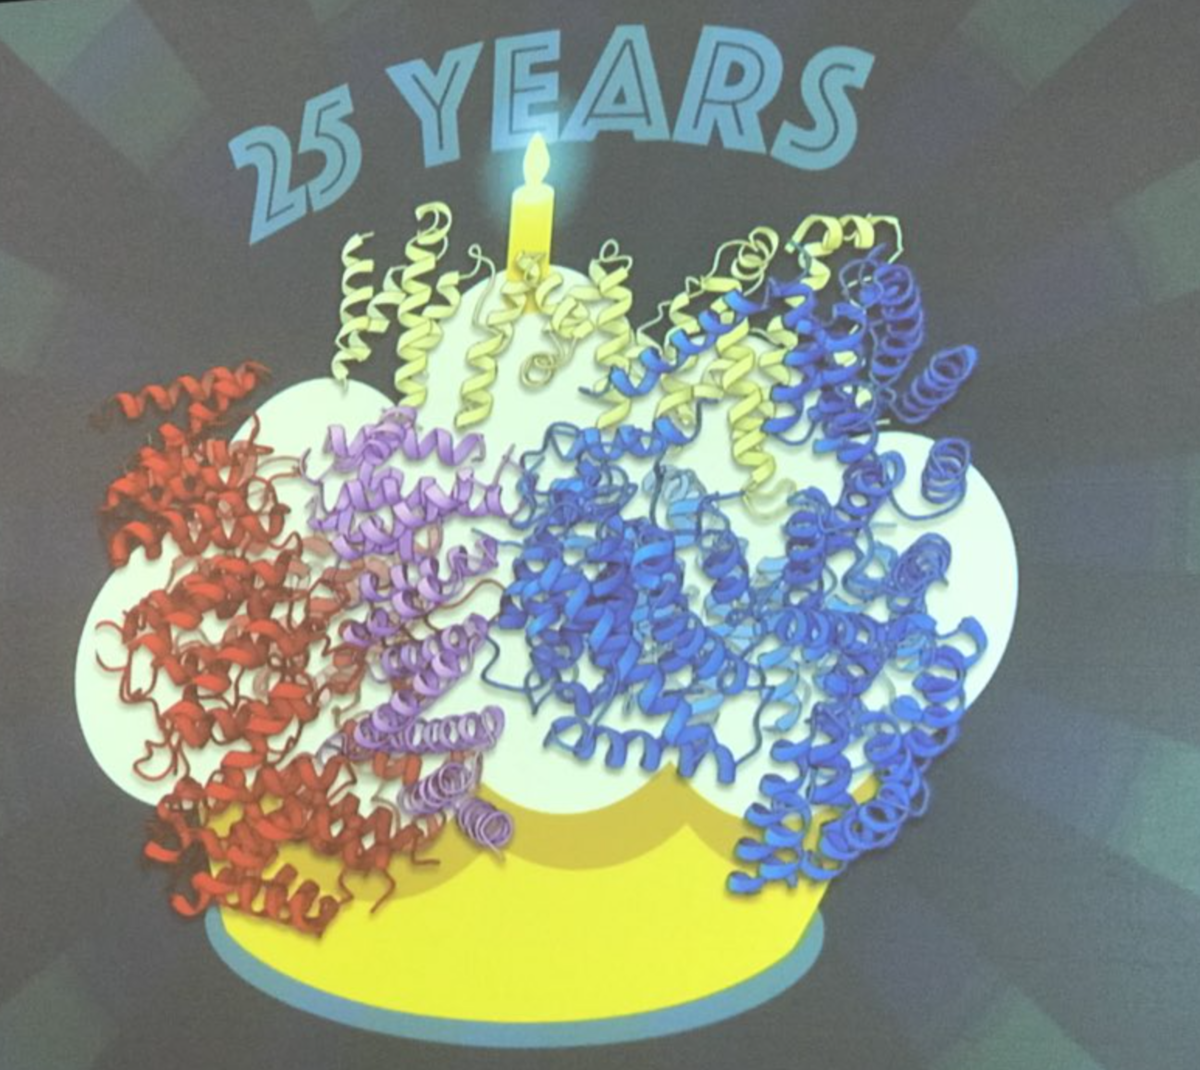 The structure of the huntingtin protein, presented by Dr Kochanek as a birthday cake for the 25th anniversary of the HD gene discovery  